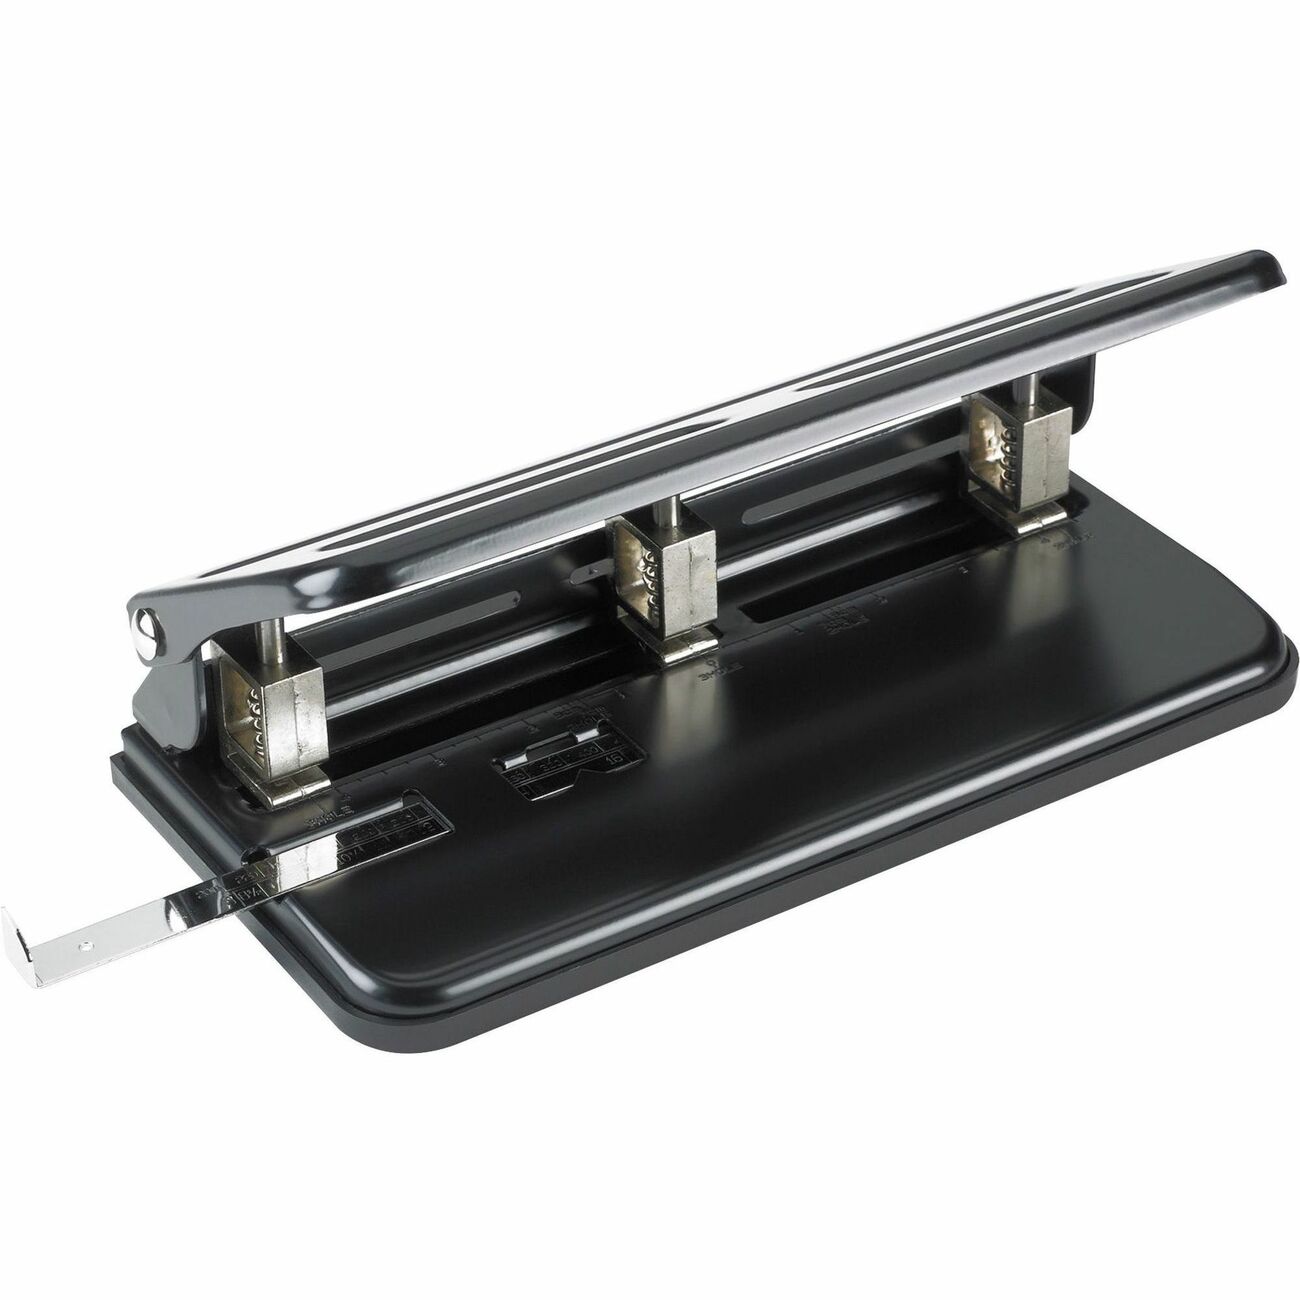 Officemate Lever Handle Heavy-Duty 2-3-Hole Punch